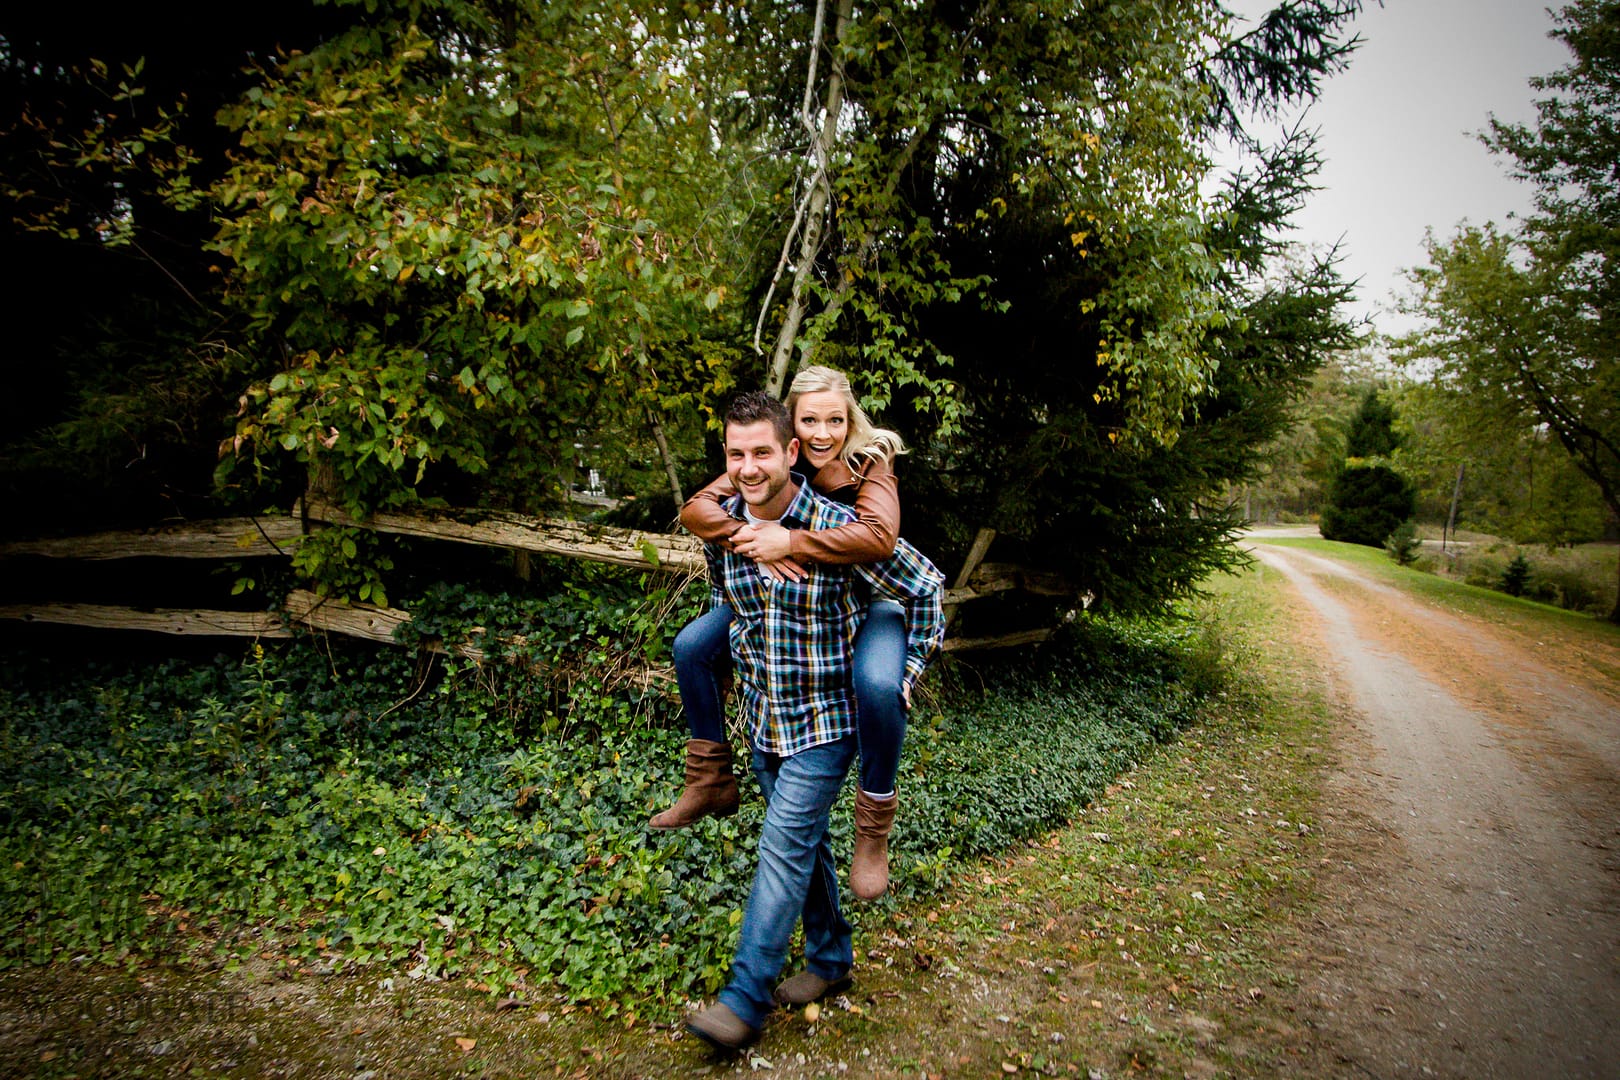 Farm engagement photography Exeter Ontario